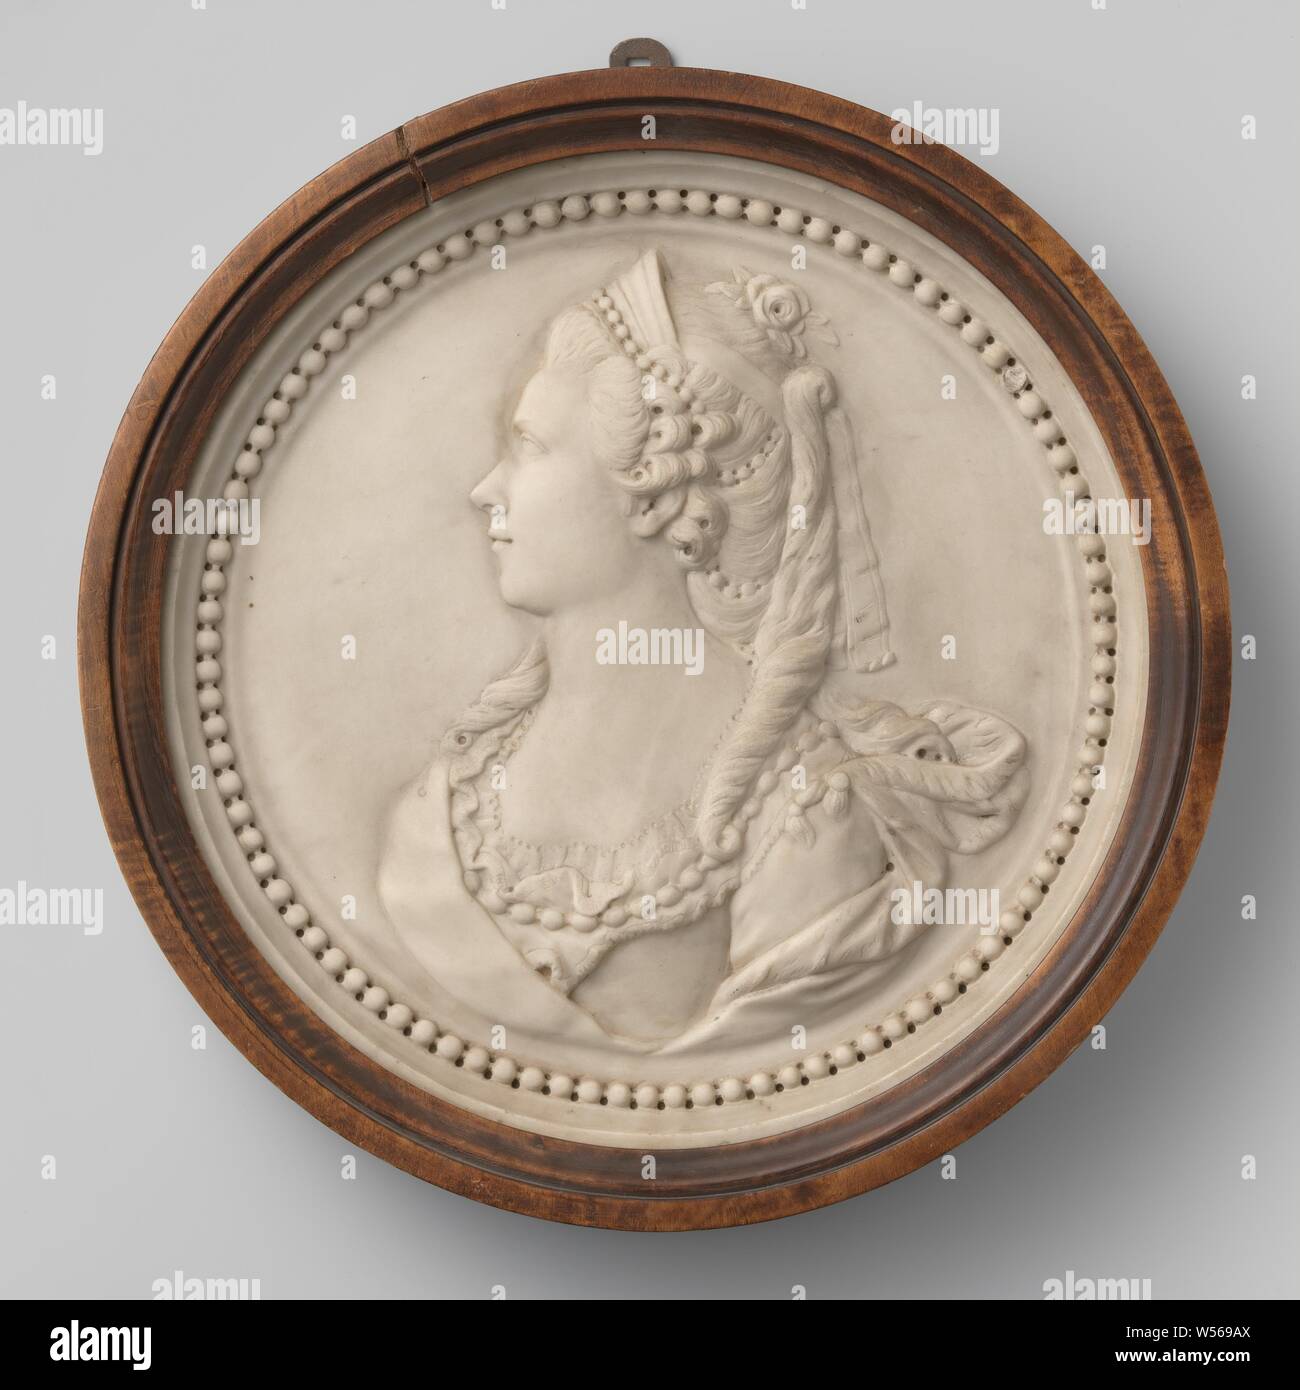 Medallion portrait, possibly of Princess Frederika Sophia Wilhelmina of Prussia (1751-1820), Wilhelmina of Prussia (1751-1820), Northern Netherlands, 1775 - 1800, marble (rock), d 38 cm Stock Photo